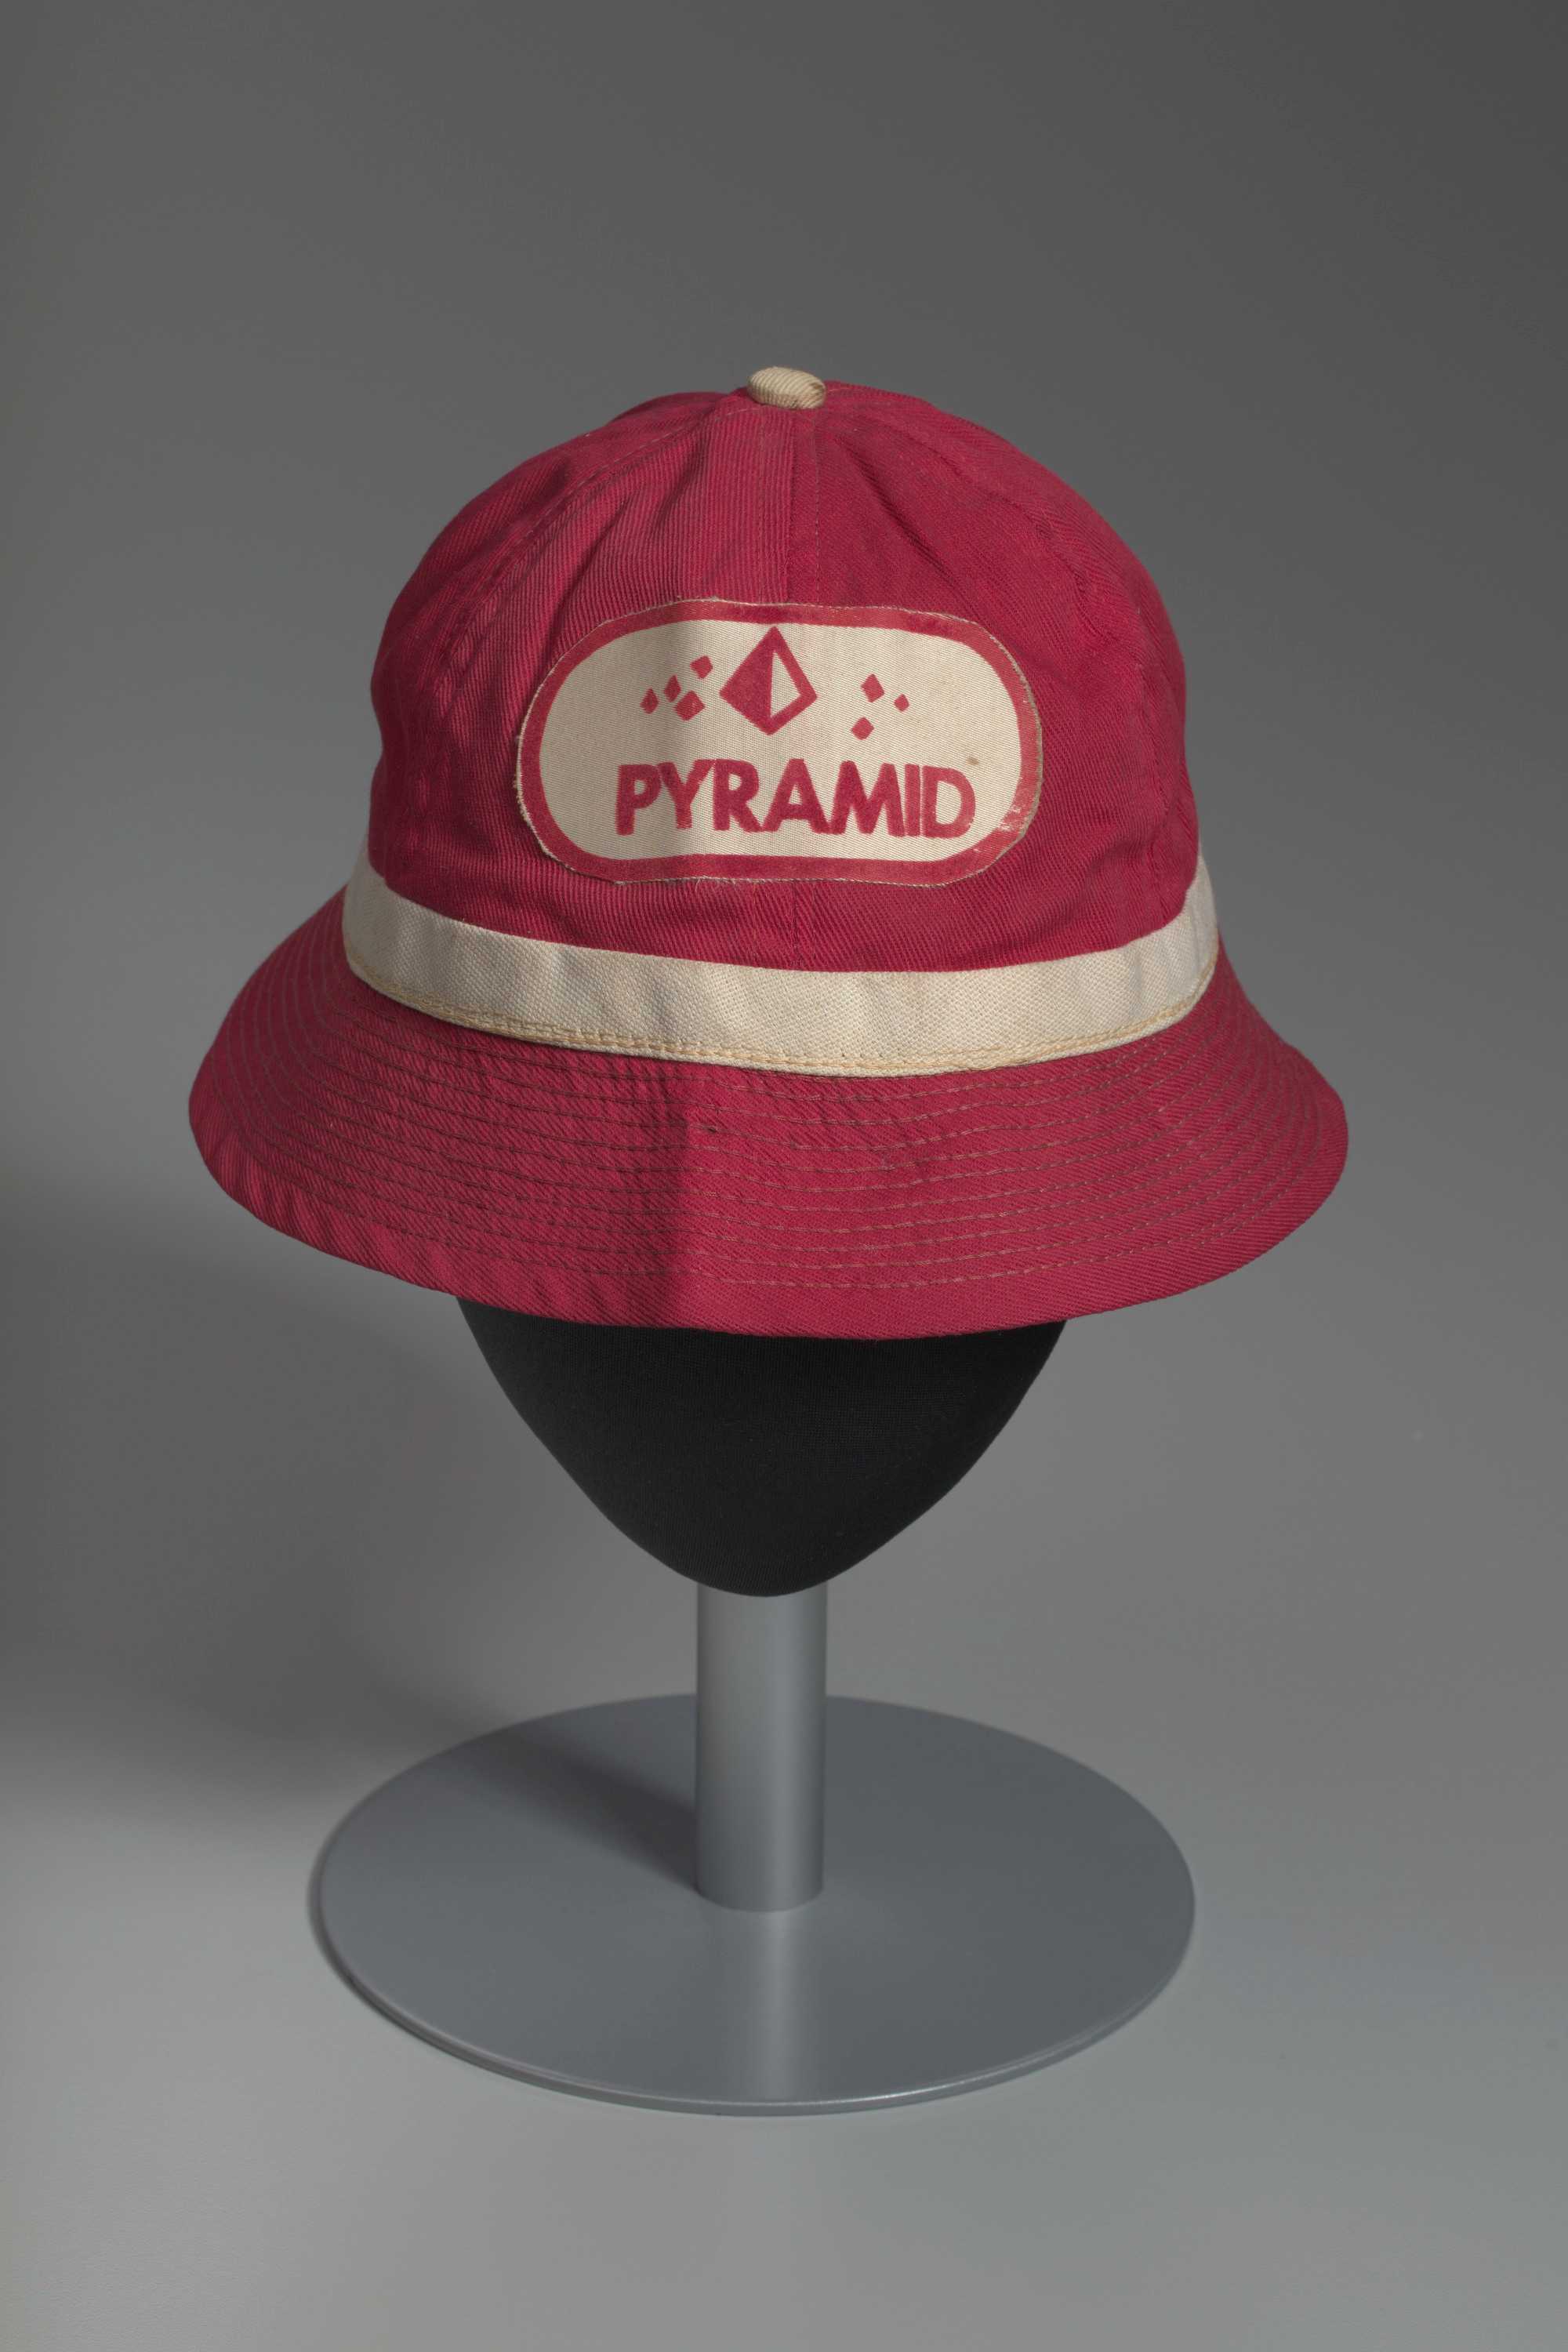 A red, canvas, pledge bucket hat with an off-white band around the base of the crown from Delta Sigma Theta sorority.